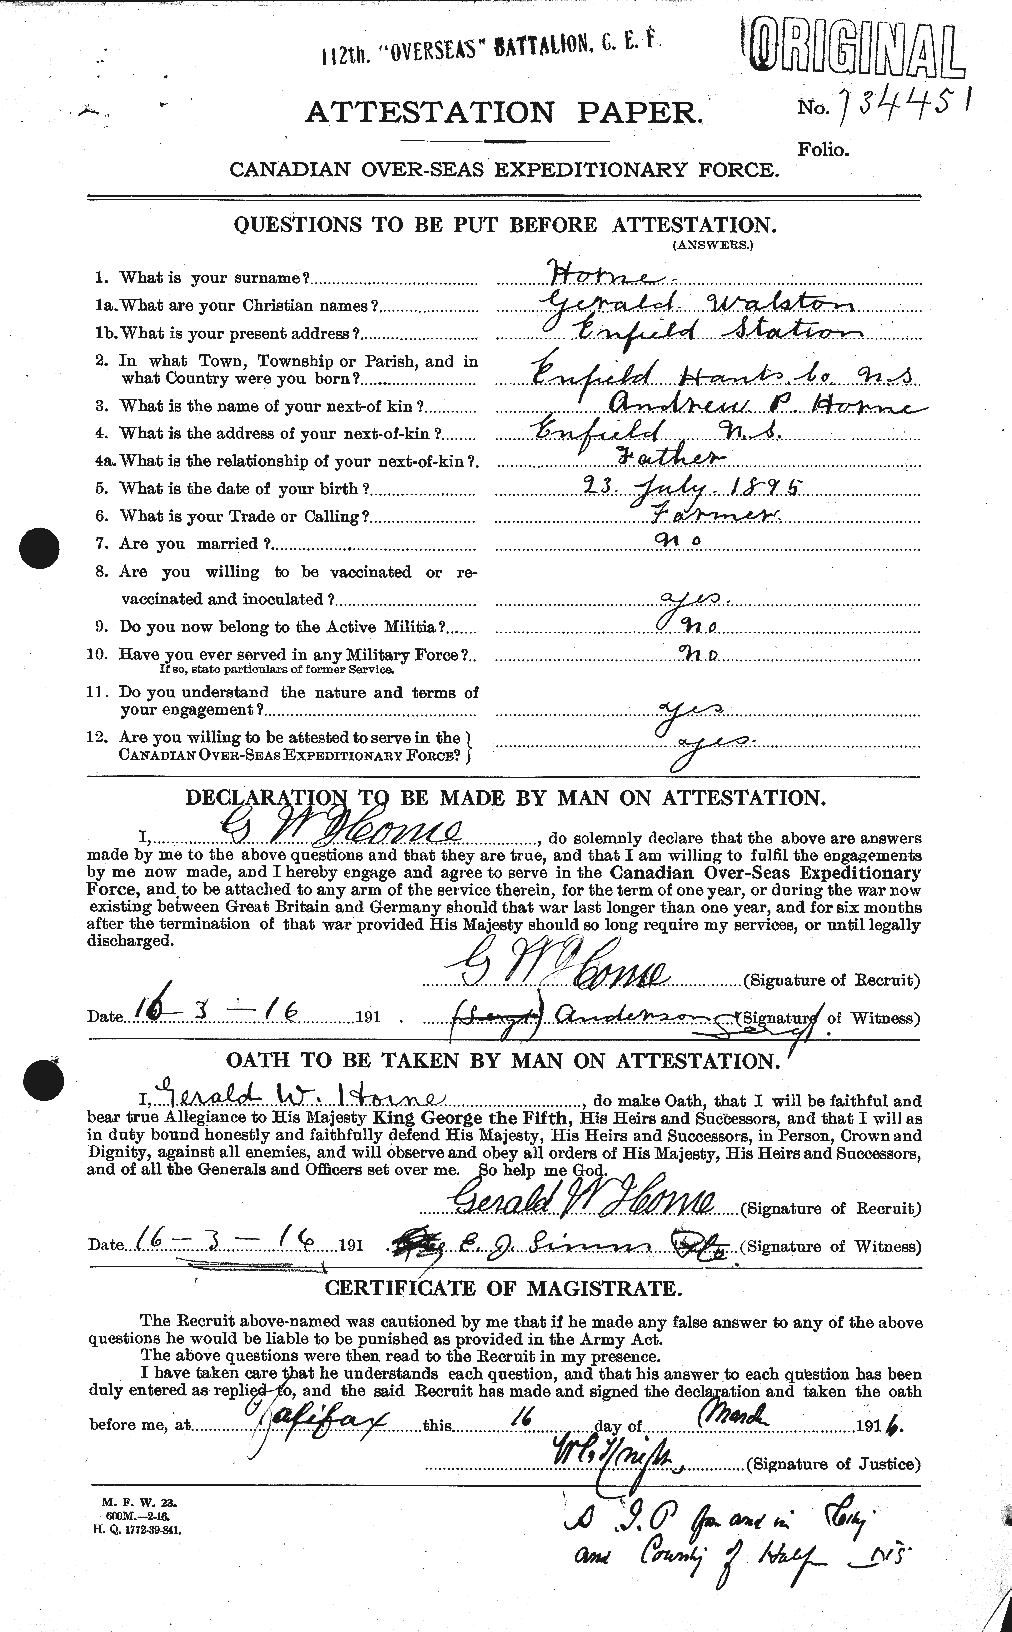 Personnel Records of the First World War - CEF 399617a